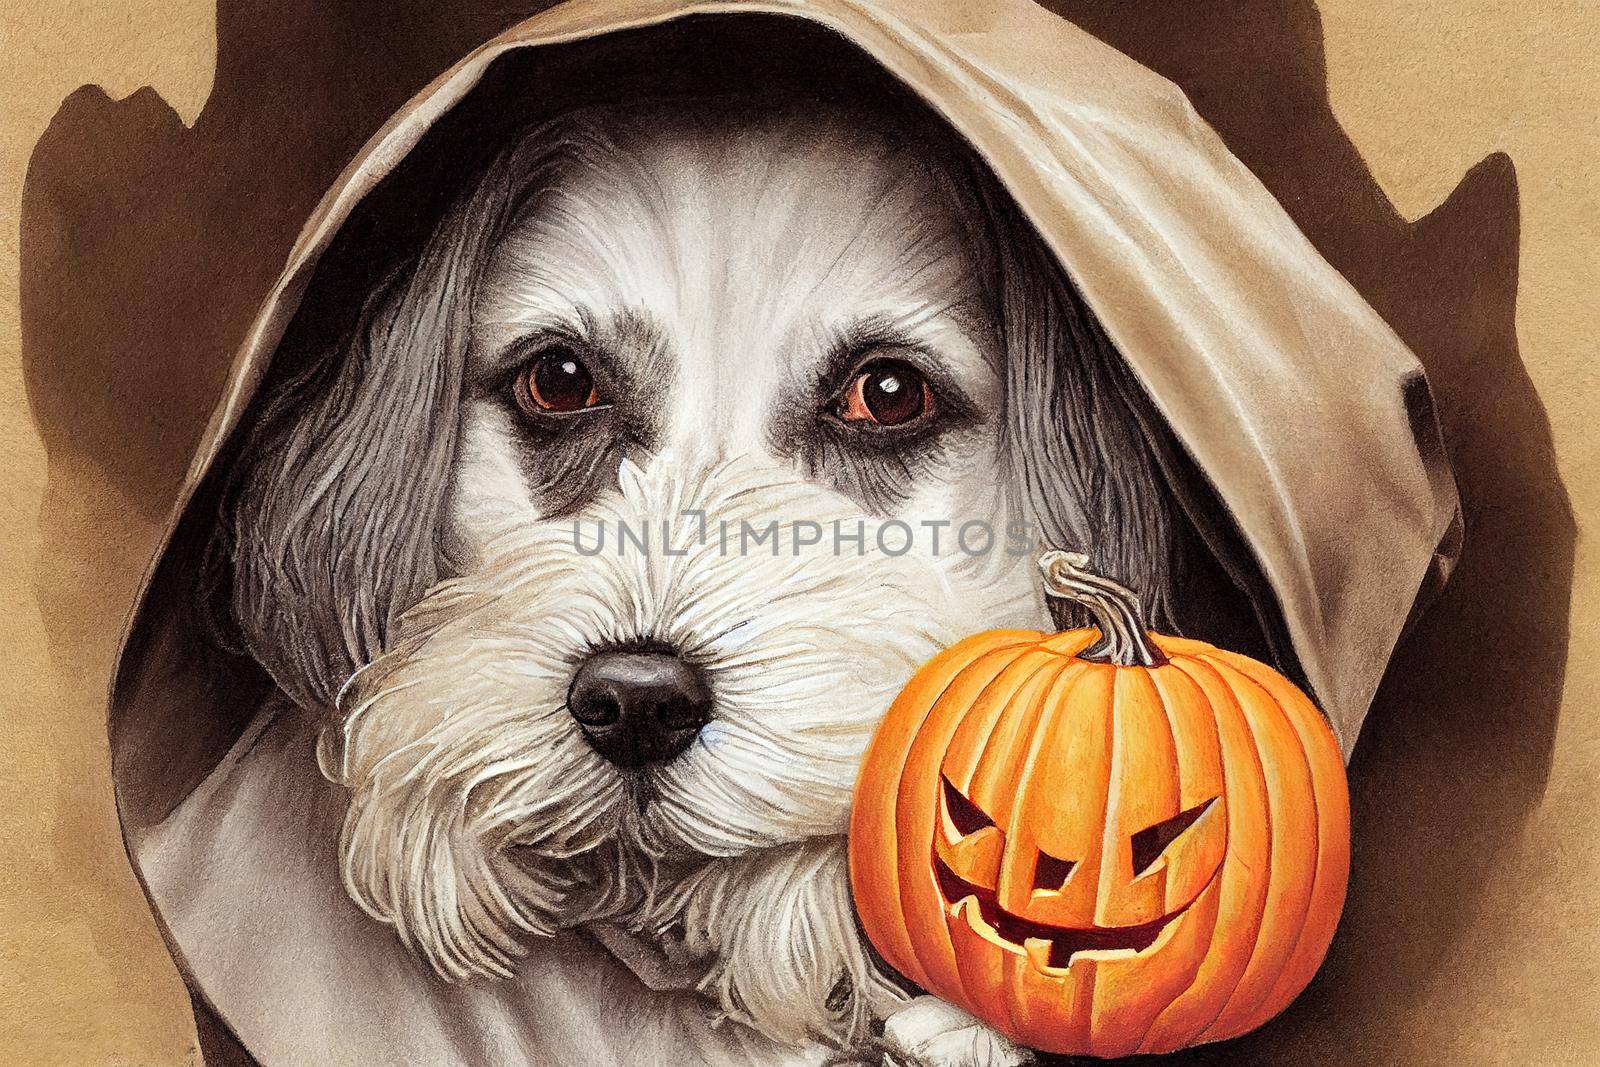 dog in a ghost costume holding a pumpkin in mouth painting, illustration, drawing v2